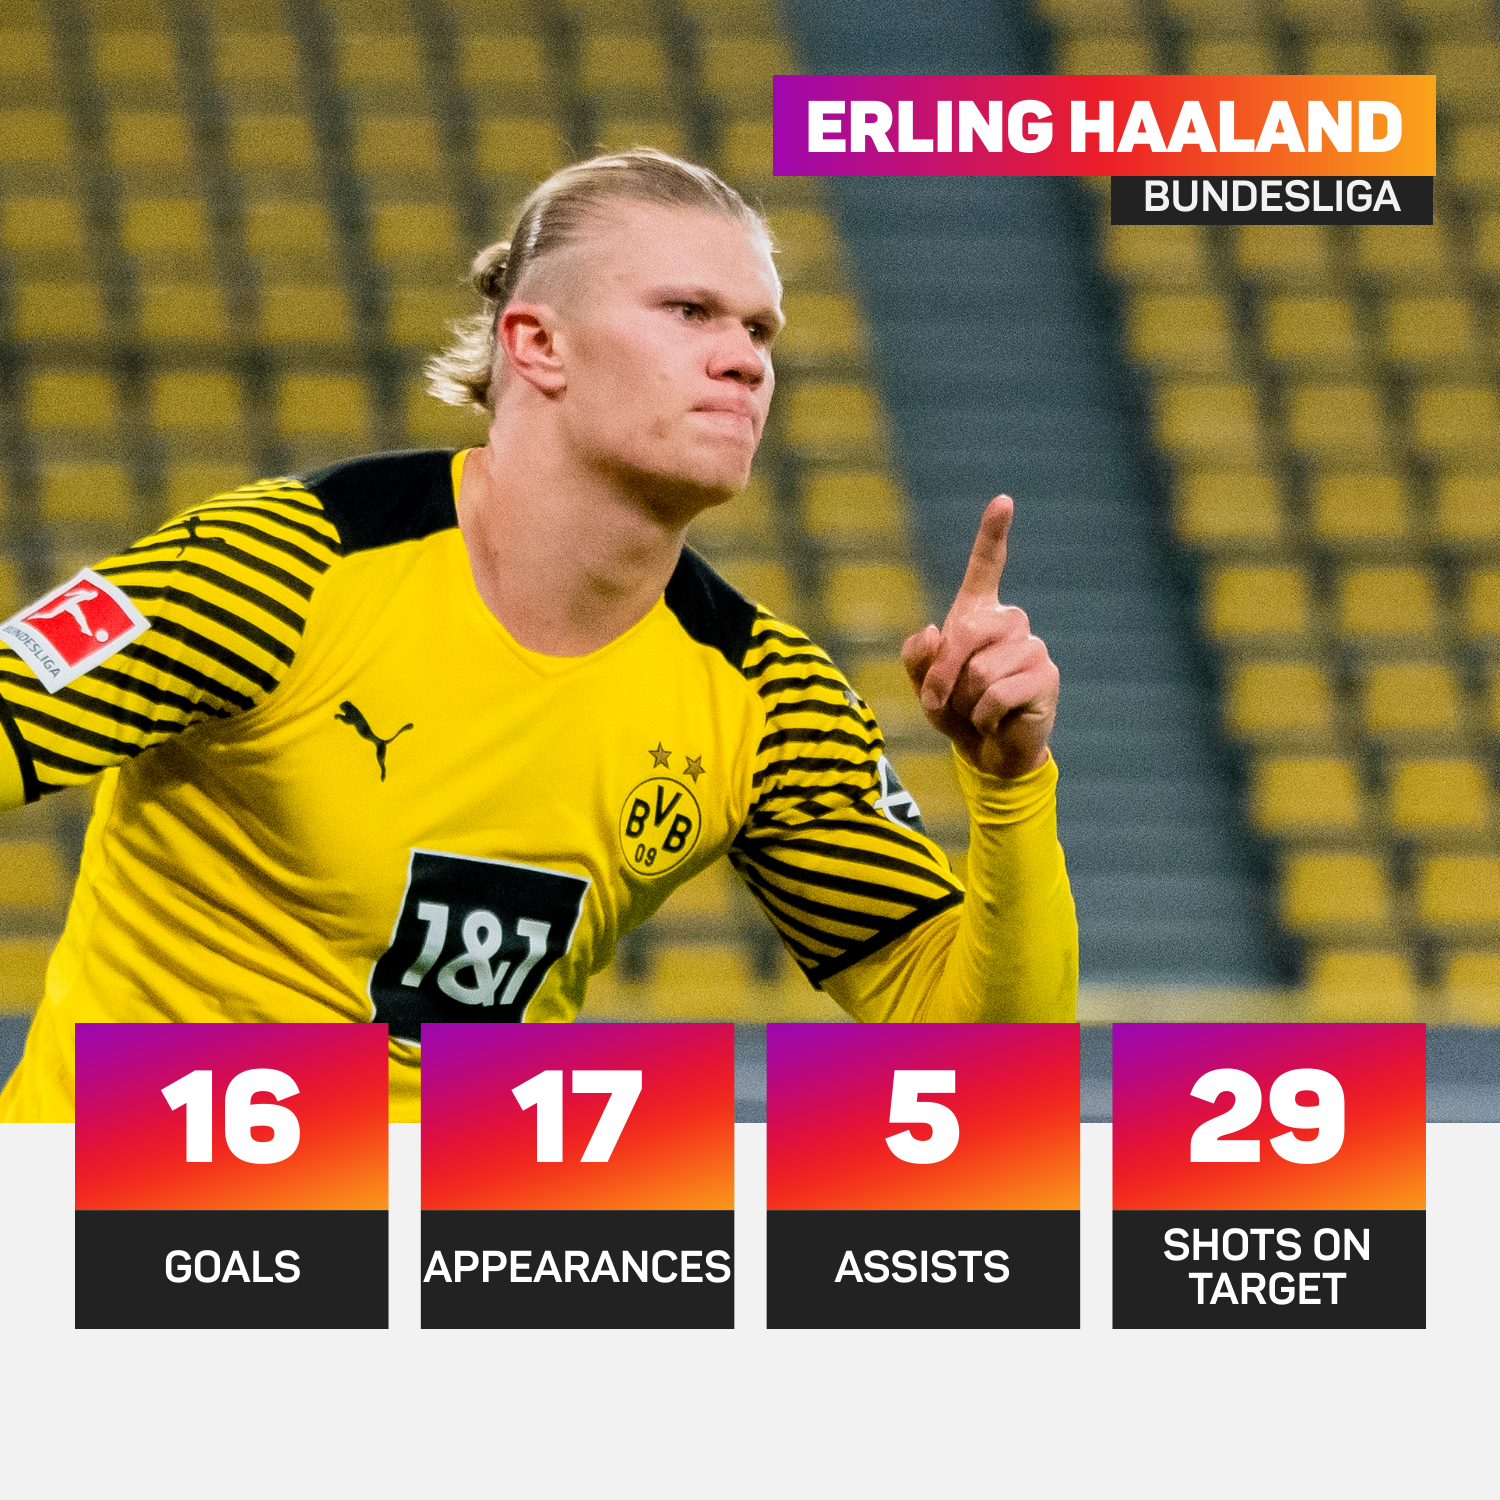 Erling Haaland seems set to leave Borussia Dortmund at the end of the season